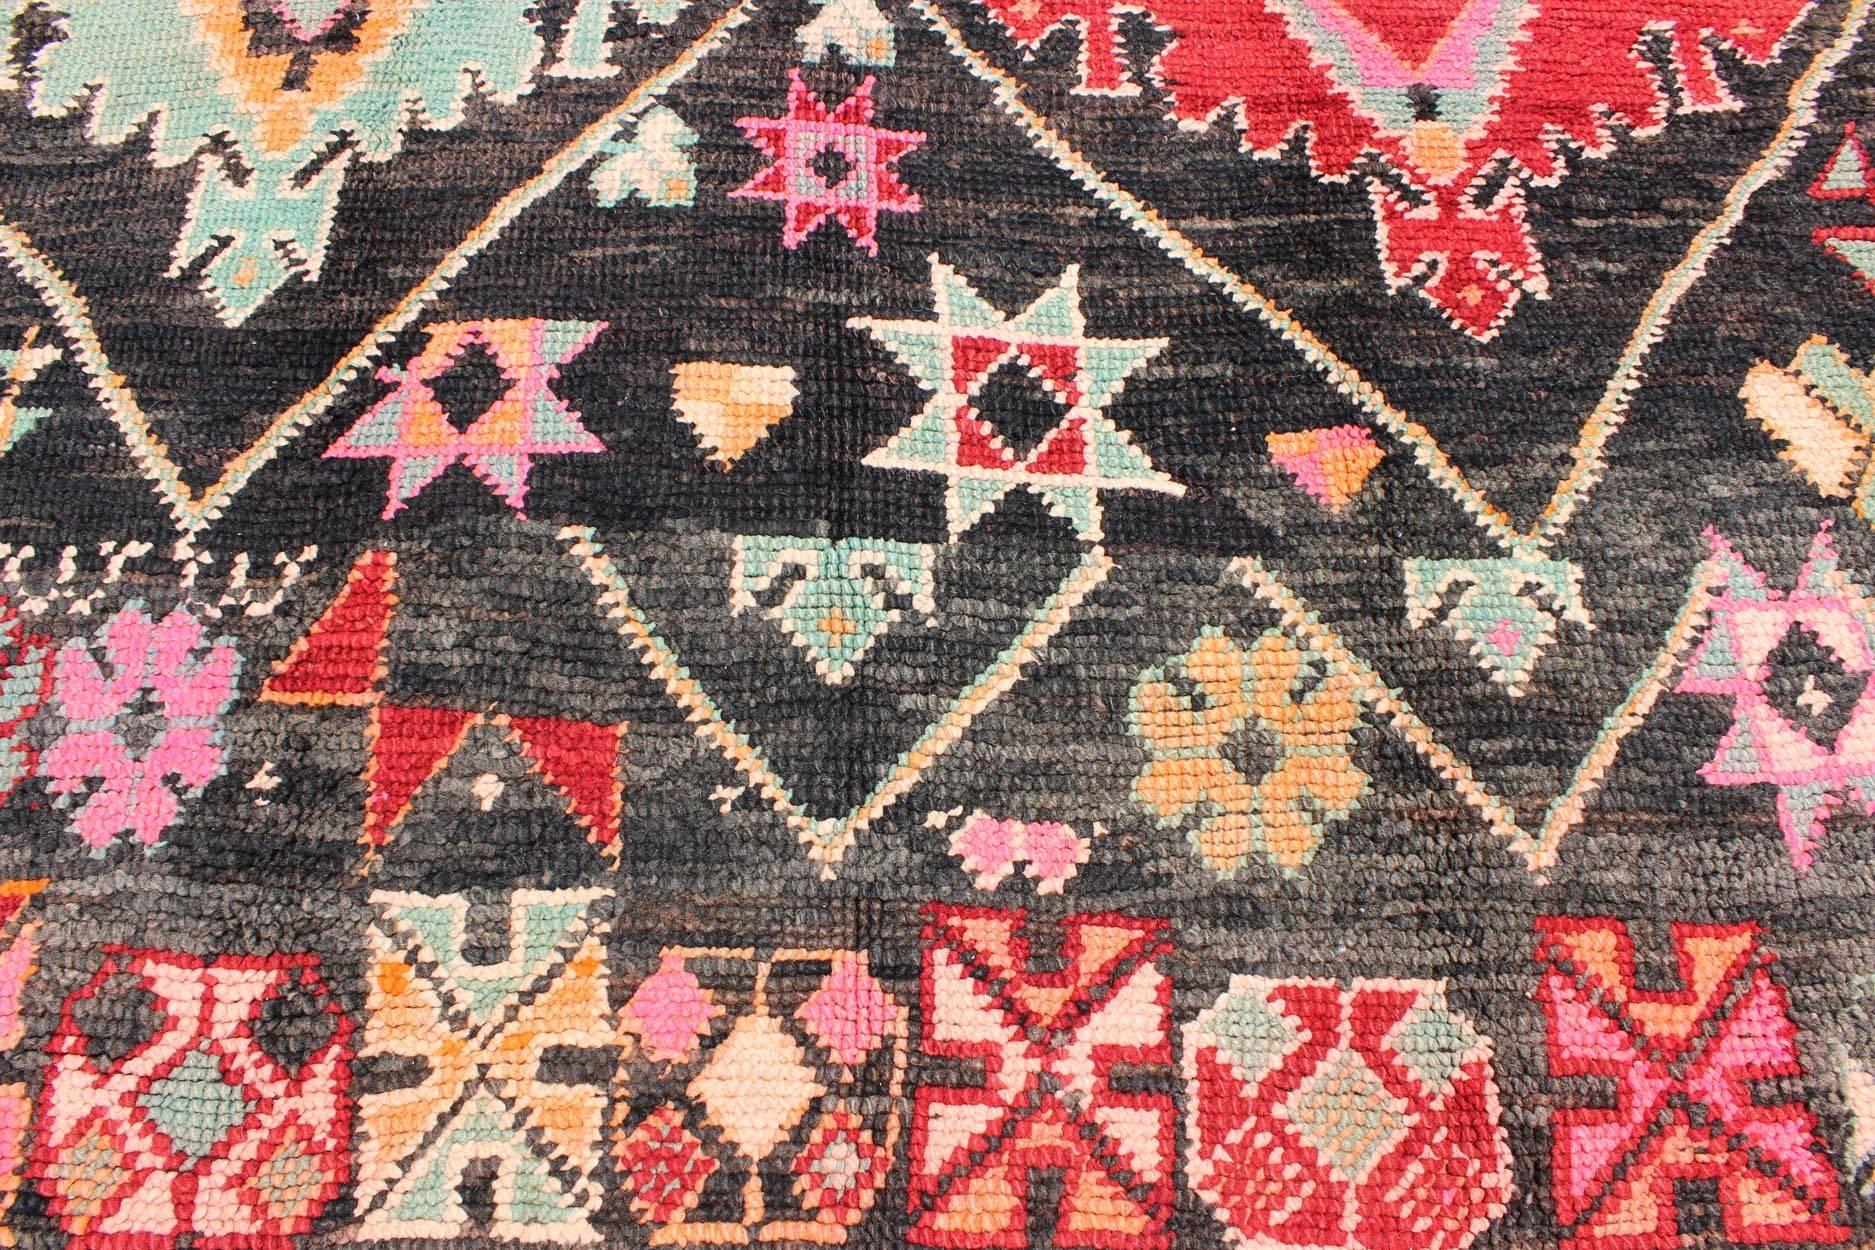 Geometric Vintage Moroccan Rug in Black, Red, Green  In Excellent Condition For Sale In Atlanta, GA